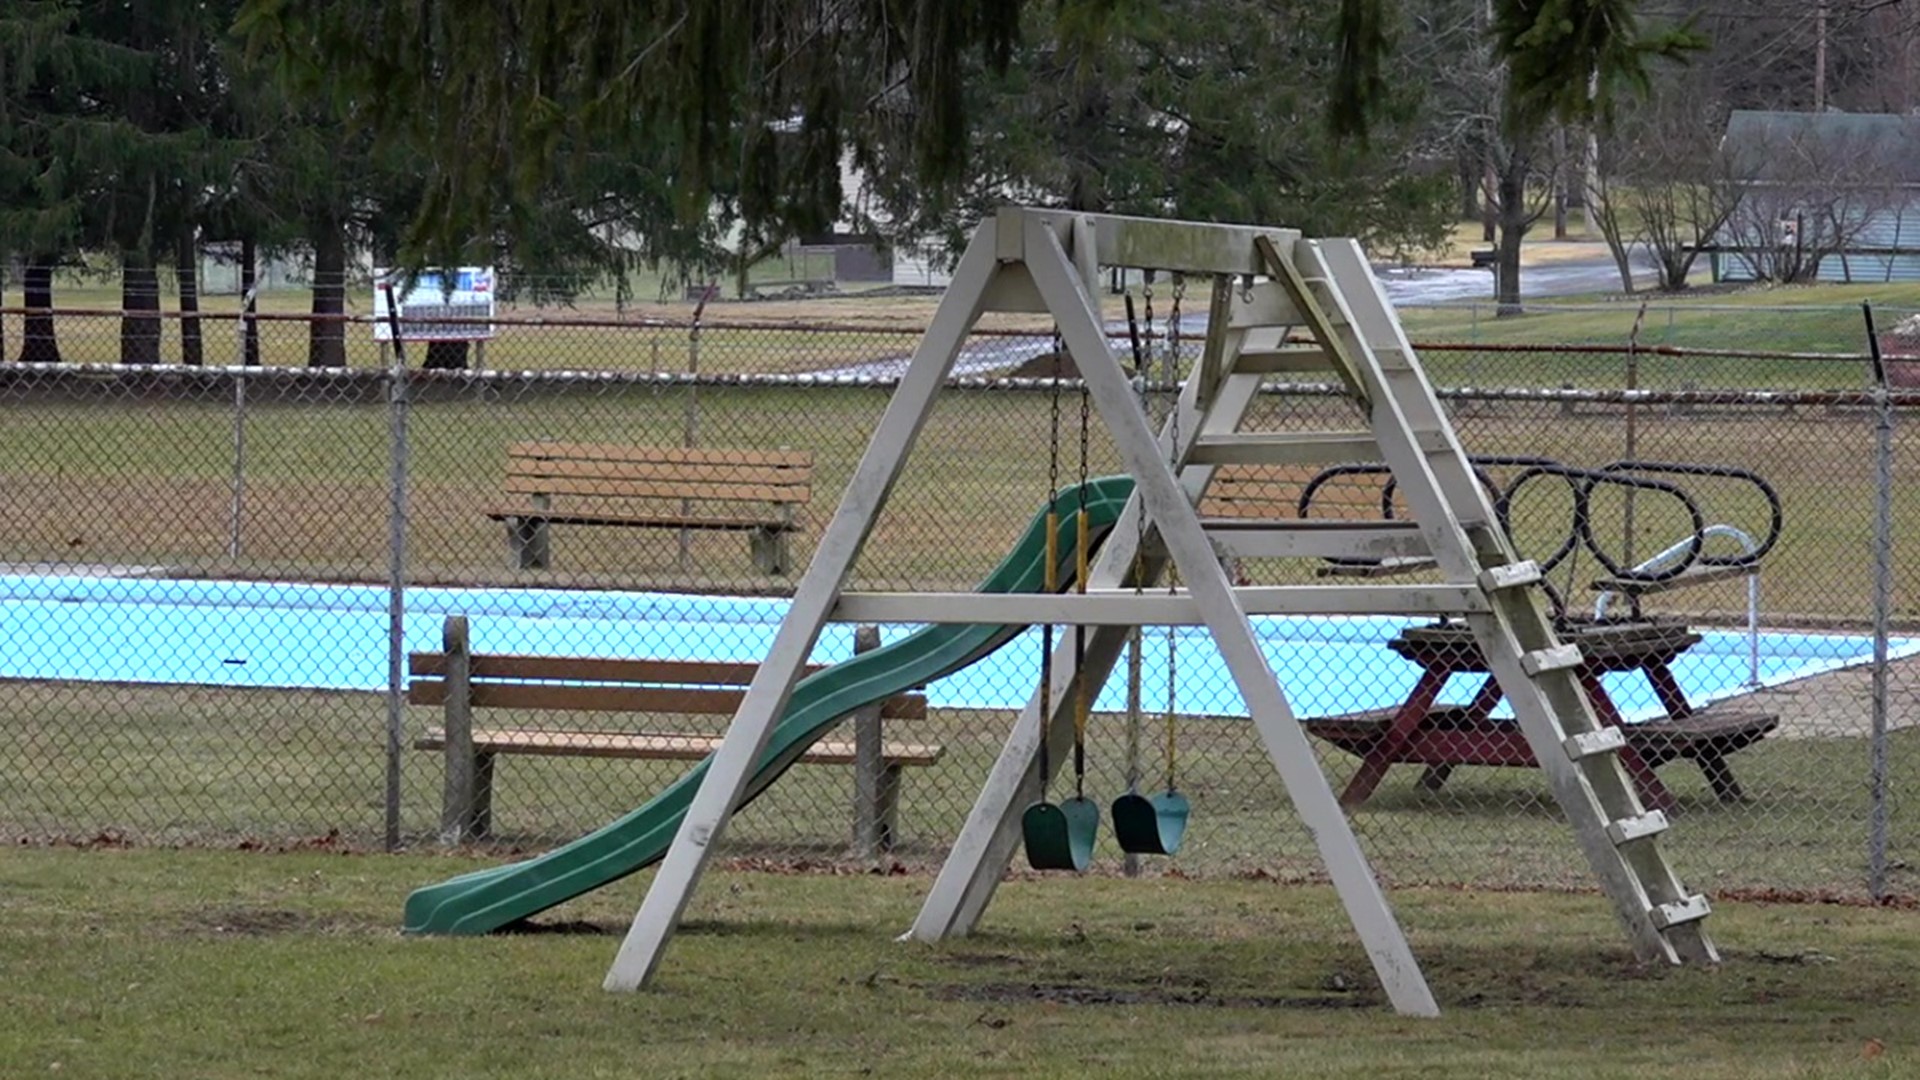 Two communities in Schuylkill County are getting grant money to improve their playgrounds to make those playgrounds bigger and better than before.